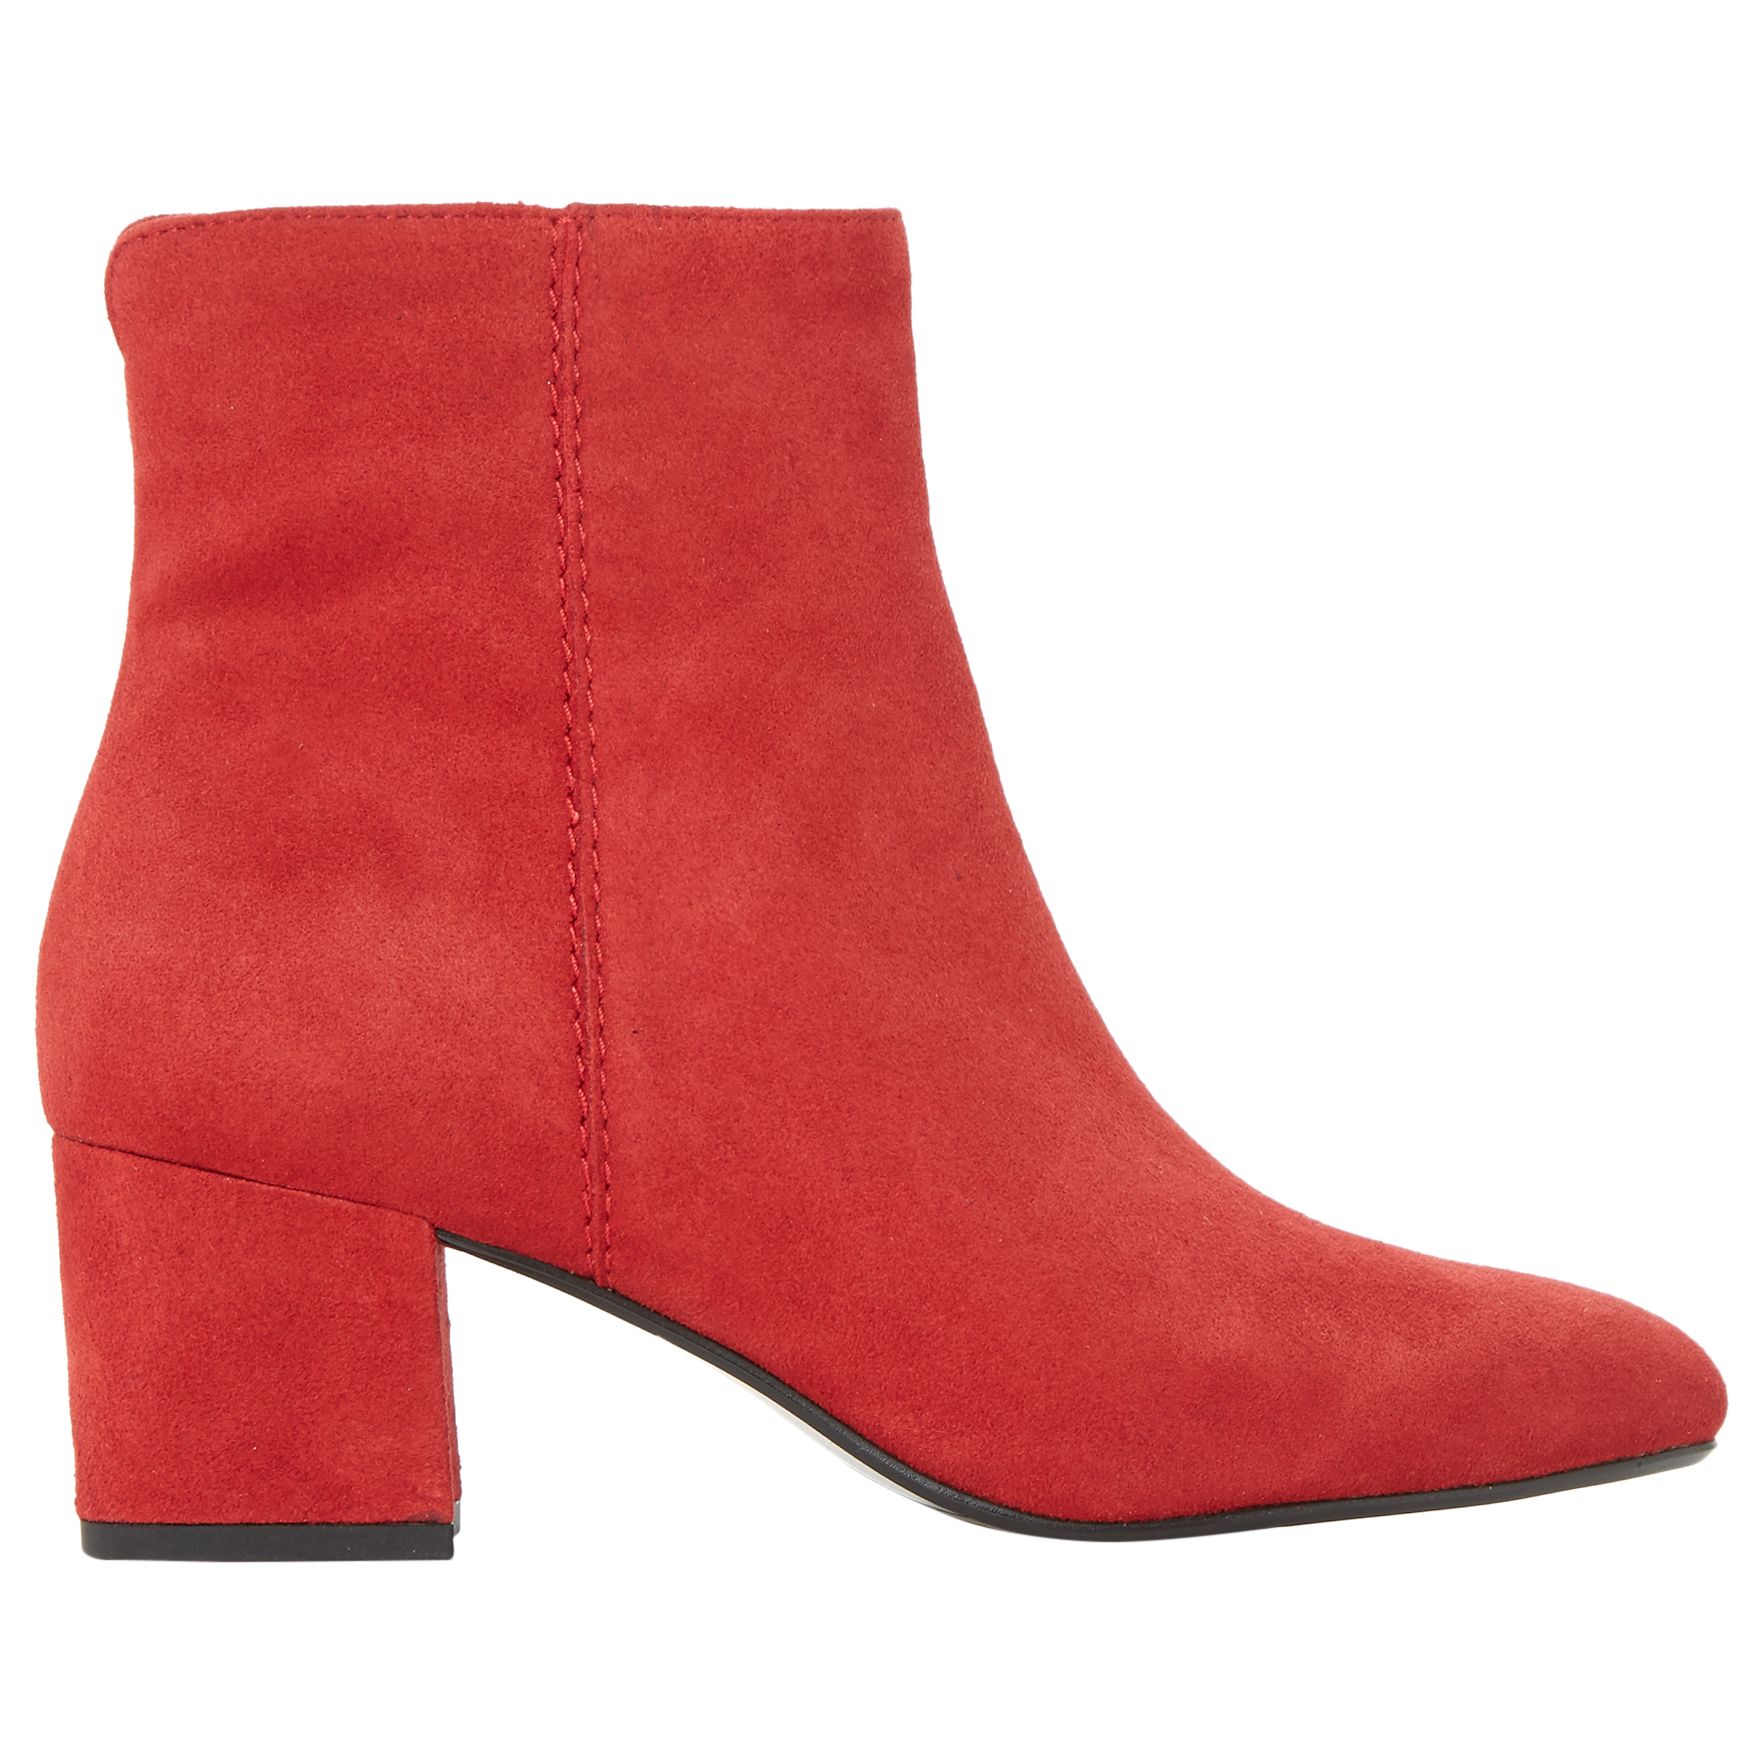 Dune Olyvea Block Heeled Ankle Boots, Red Suede, 6